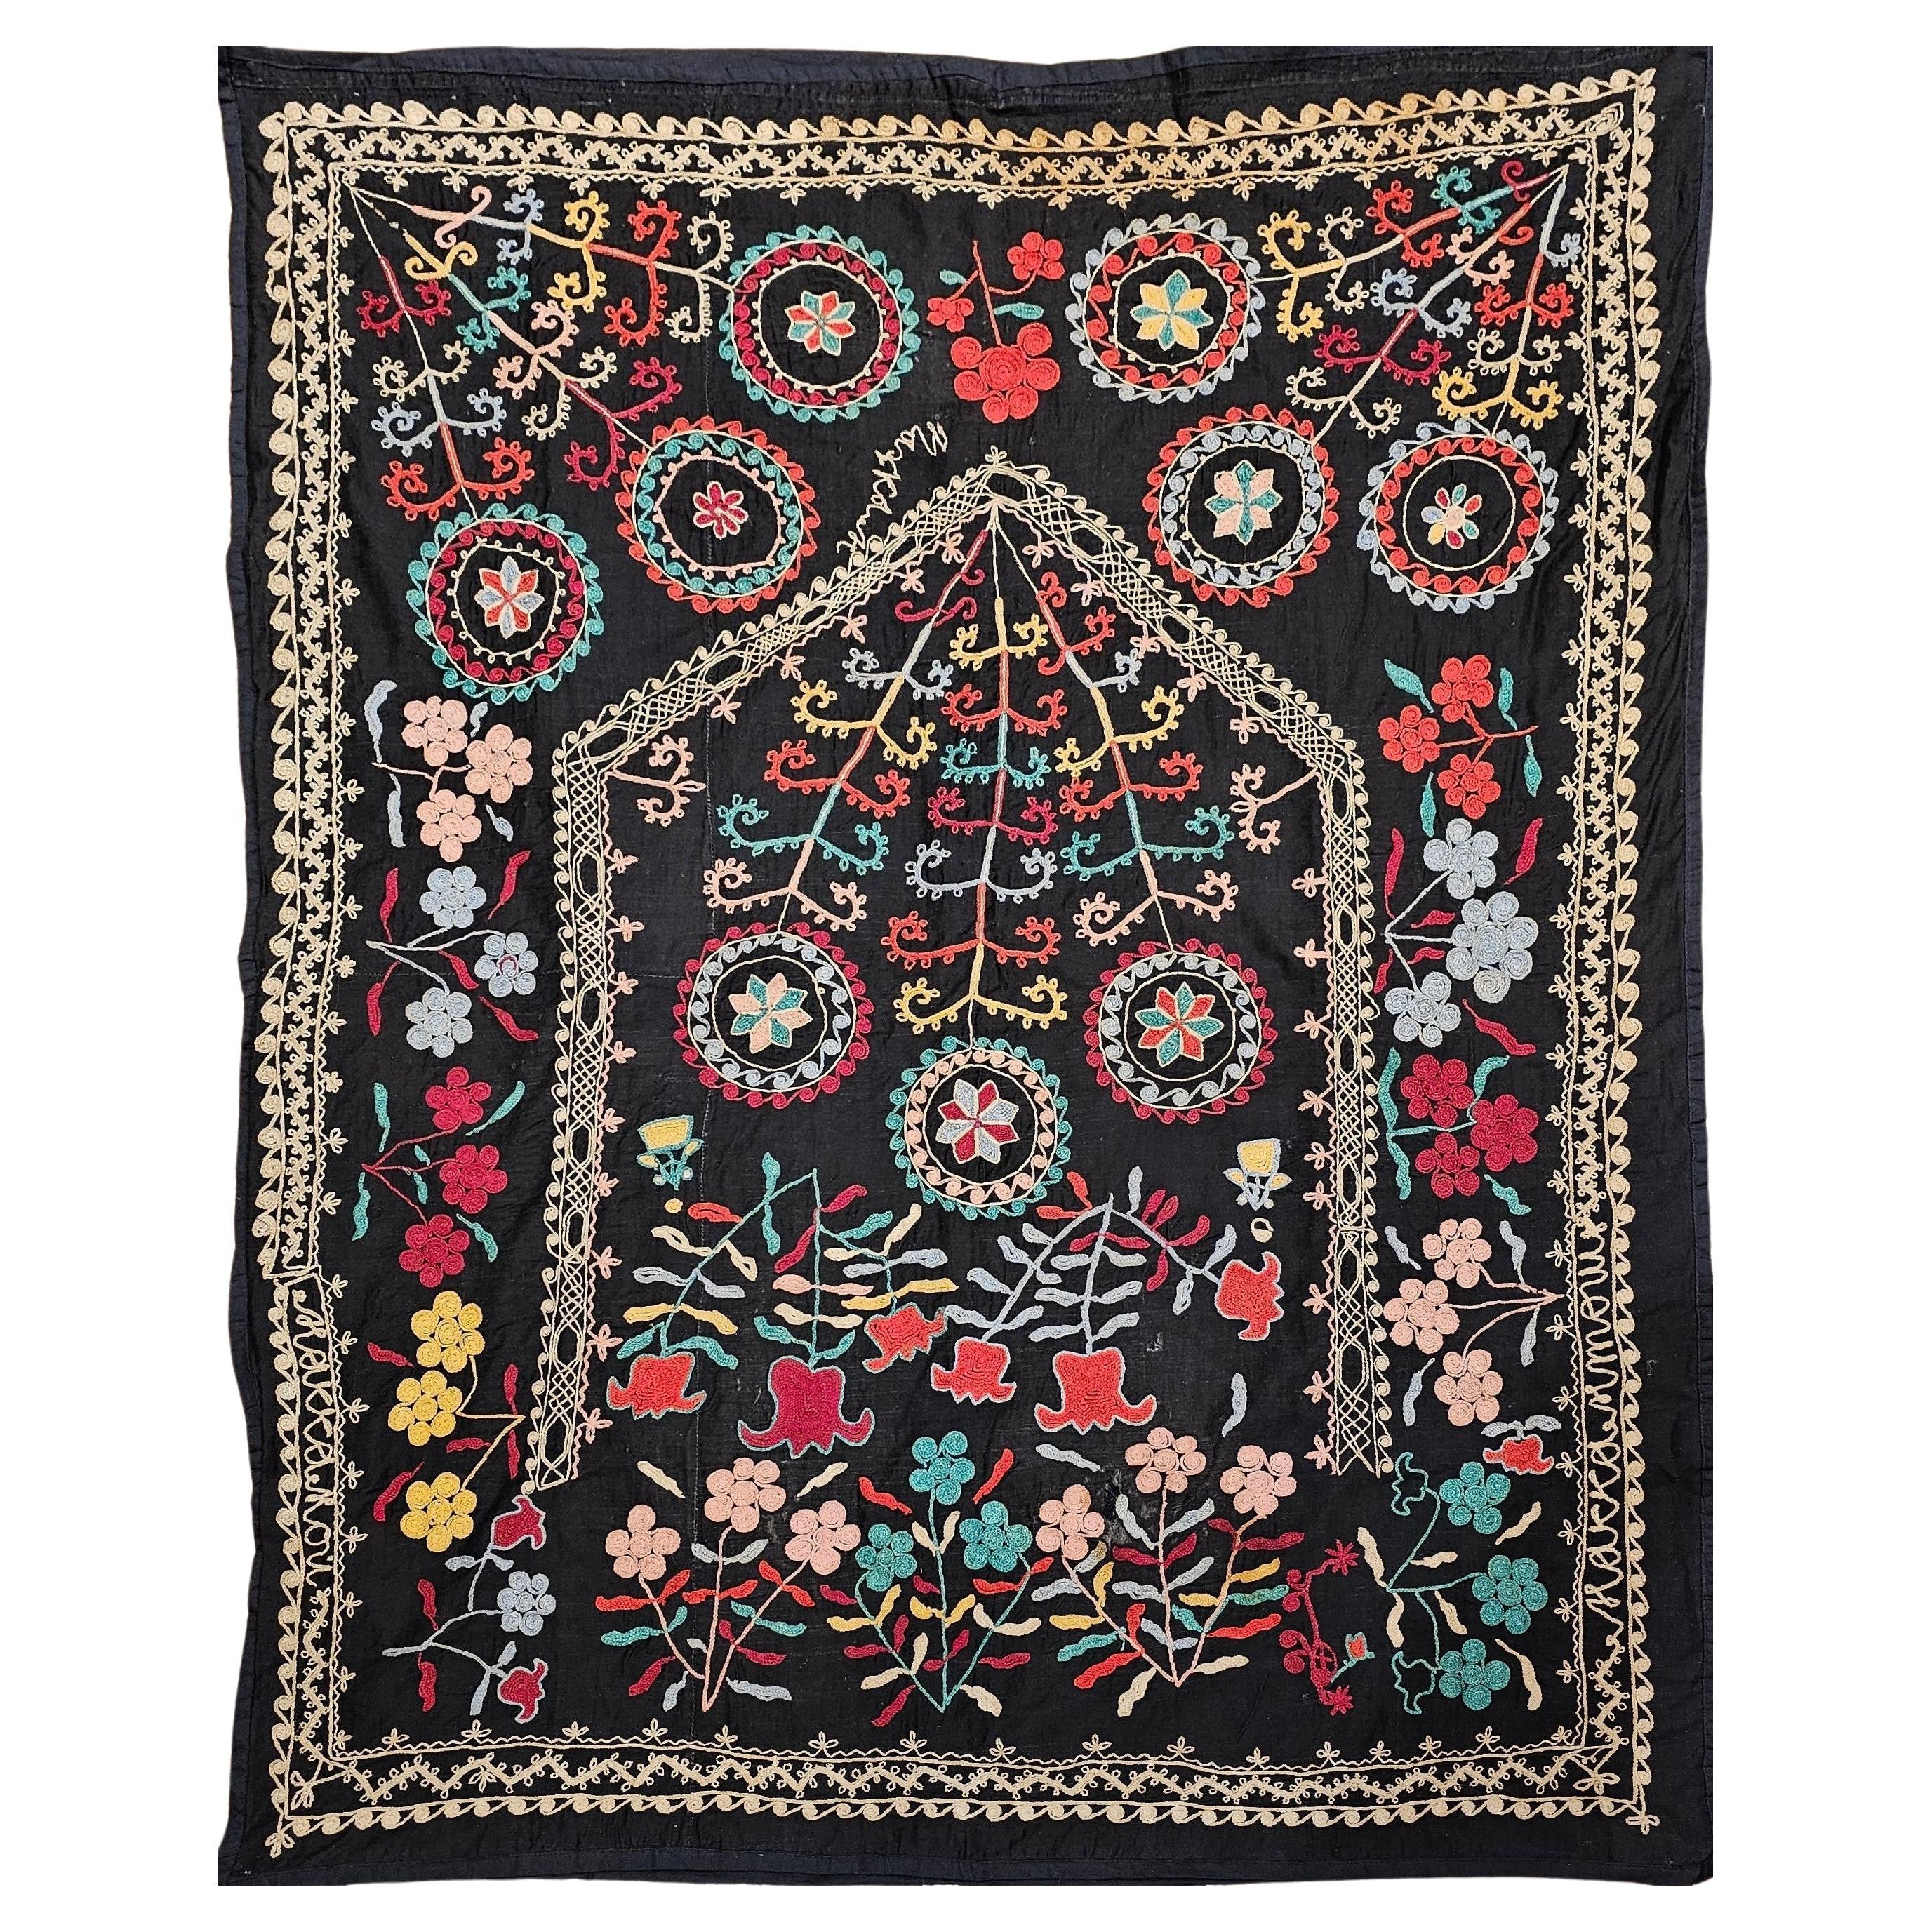 Vintage Hand Embroidered Uzbek Silk Suzani in Black, Red, Green, Yellow Wall Art